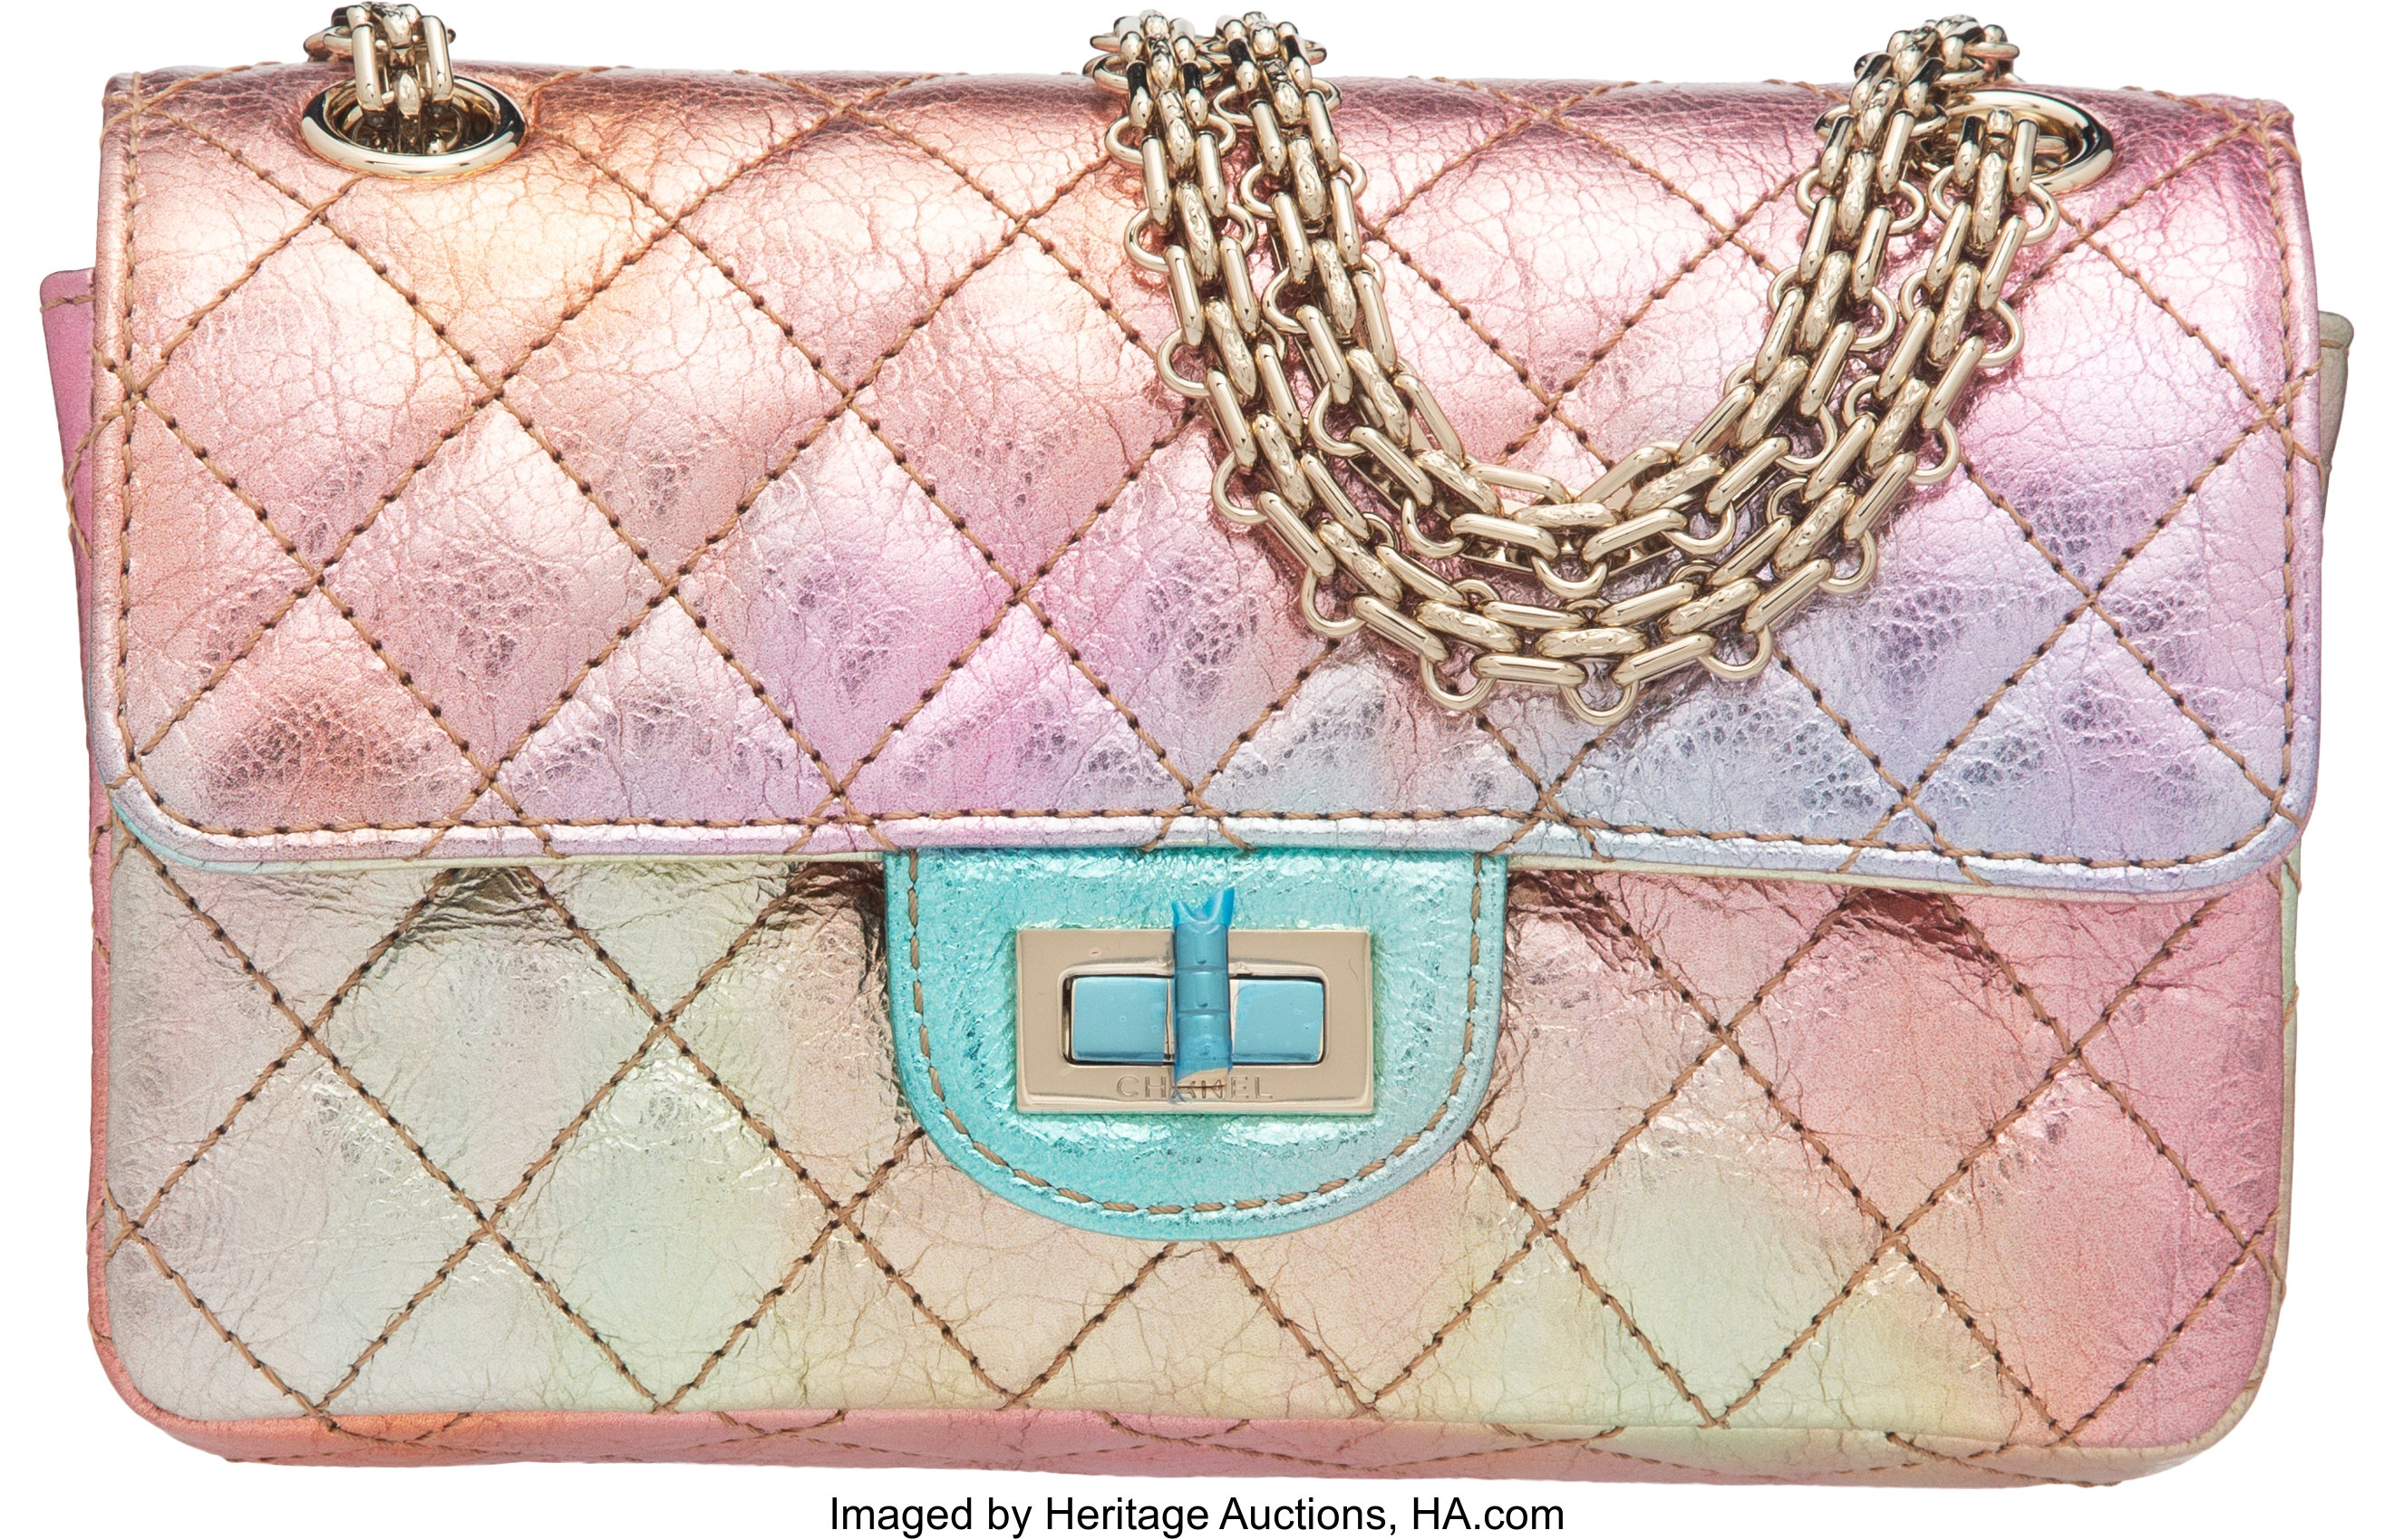 Chanel Limited Edition Iridescent Quilted Aged Goat Skin 2.55, Lot #58137